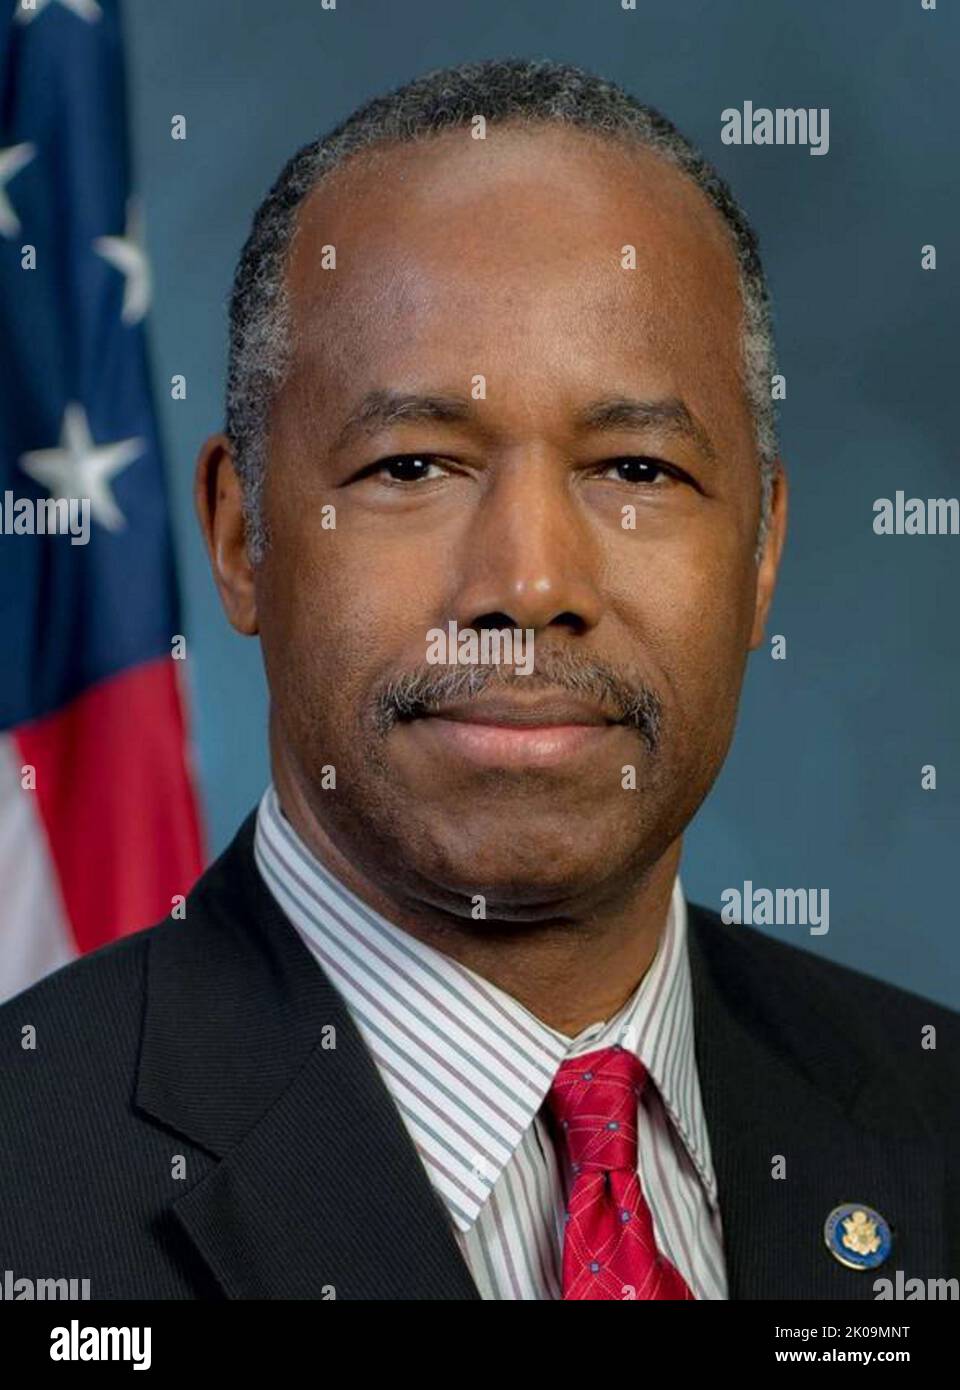 Benjamin Solomon Carson Sr. (born September 18, 1951) is an American retired neurosurgeon and politician who served as the 17th United States Secretary of Housing and Urban Development from 2017 to 2021. He was a candidate for President of the United States in the 2016 Republican primaries. He is considered a pioneer in the field of neurosurgery. Stock Photo